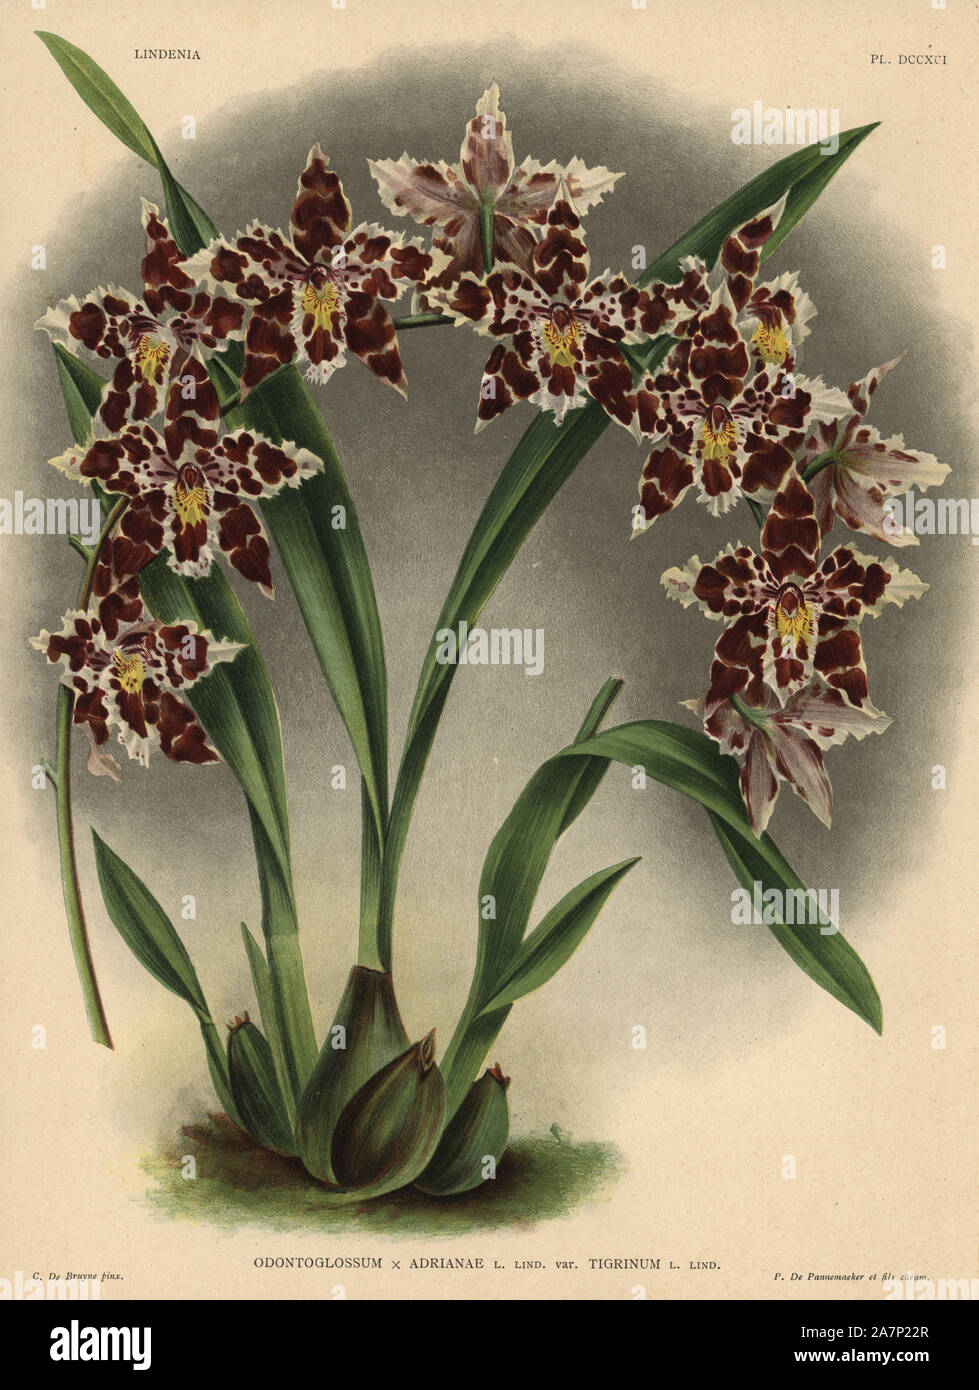 Tigrinum variety of Odontoglossum x Adrianae hybrid orchid. Illustration drawn by C. de Bruyne and chromolithographed by P. de Pannemaeker et fils from Lucien Linden's 'Lindenia, Iconographie des Orchidees,' Brussels, 1902. Stock Photo